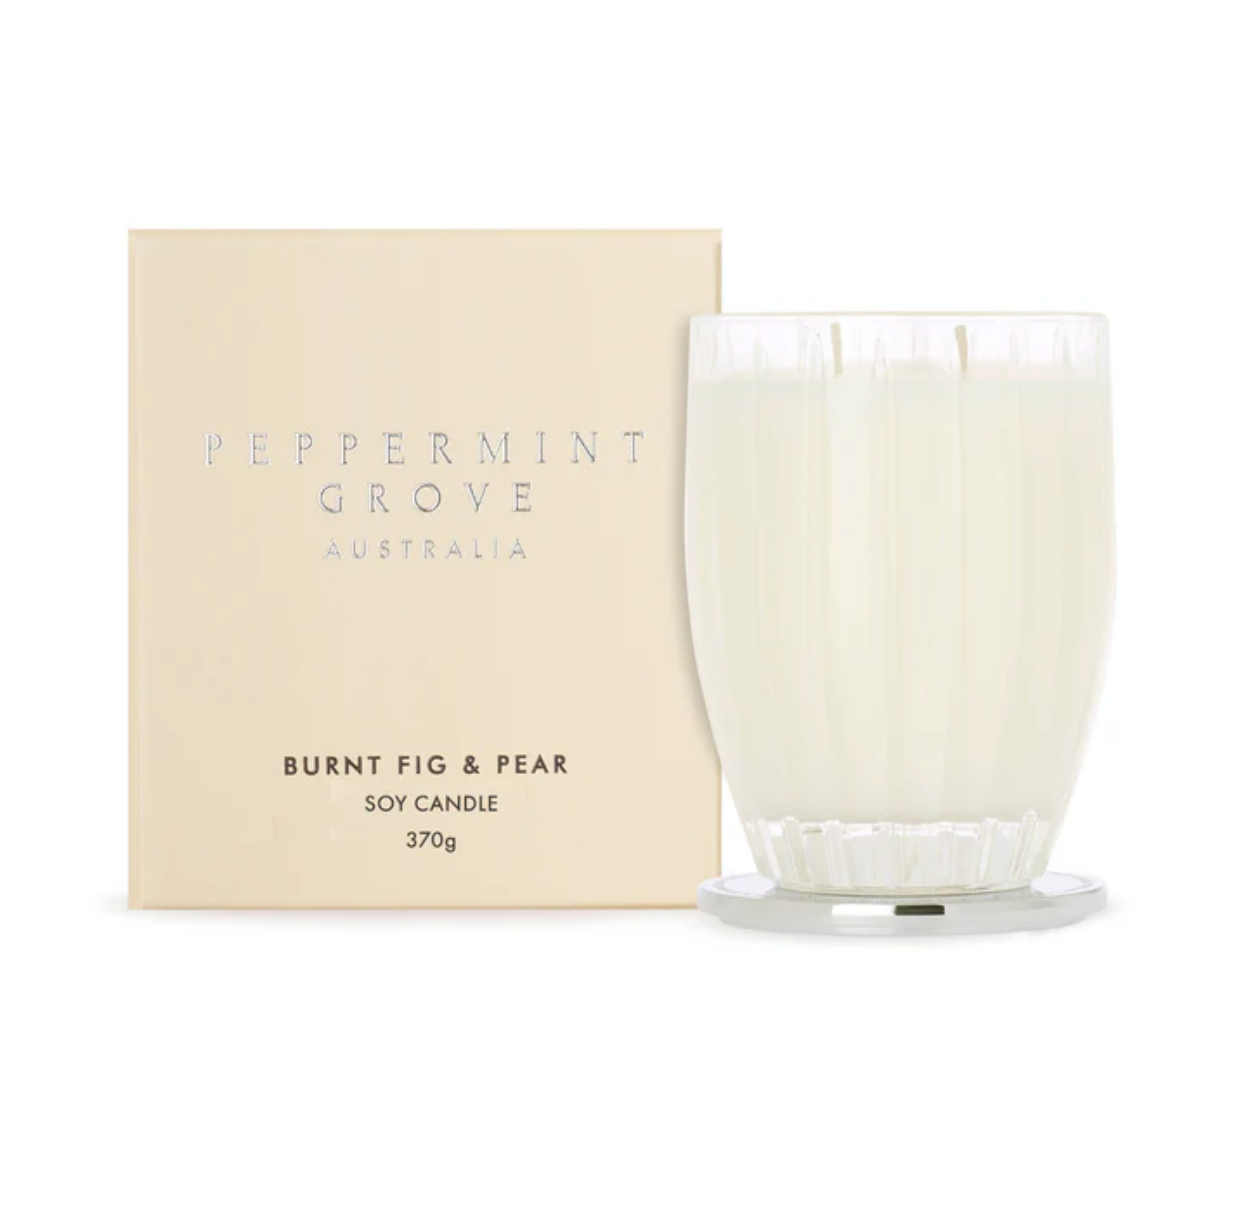 Pepperment Grove Soy Candle - Burnt Fig and Pear 370g